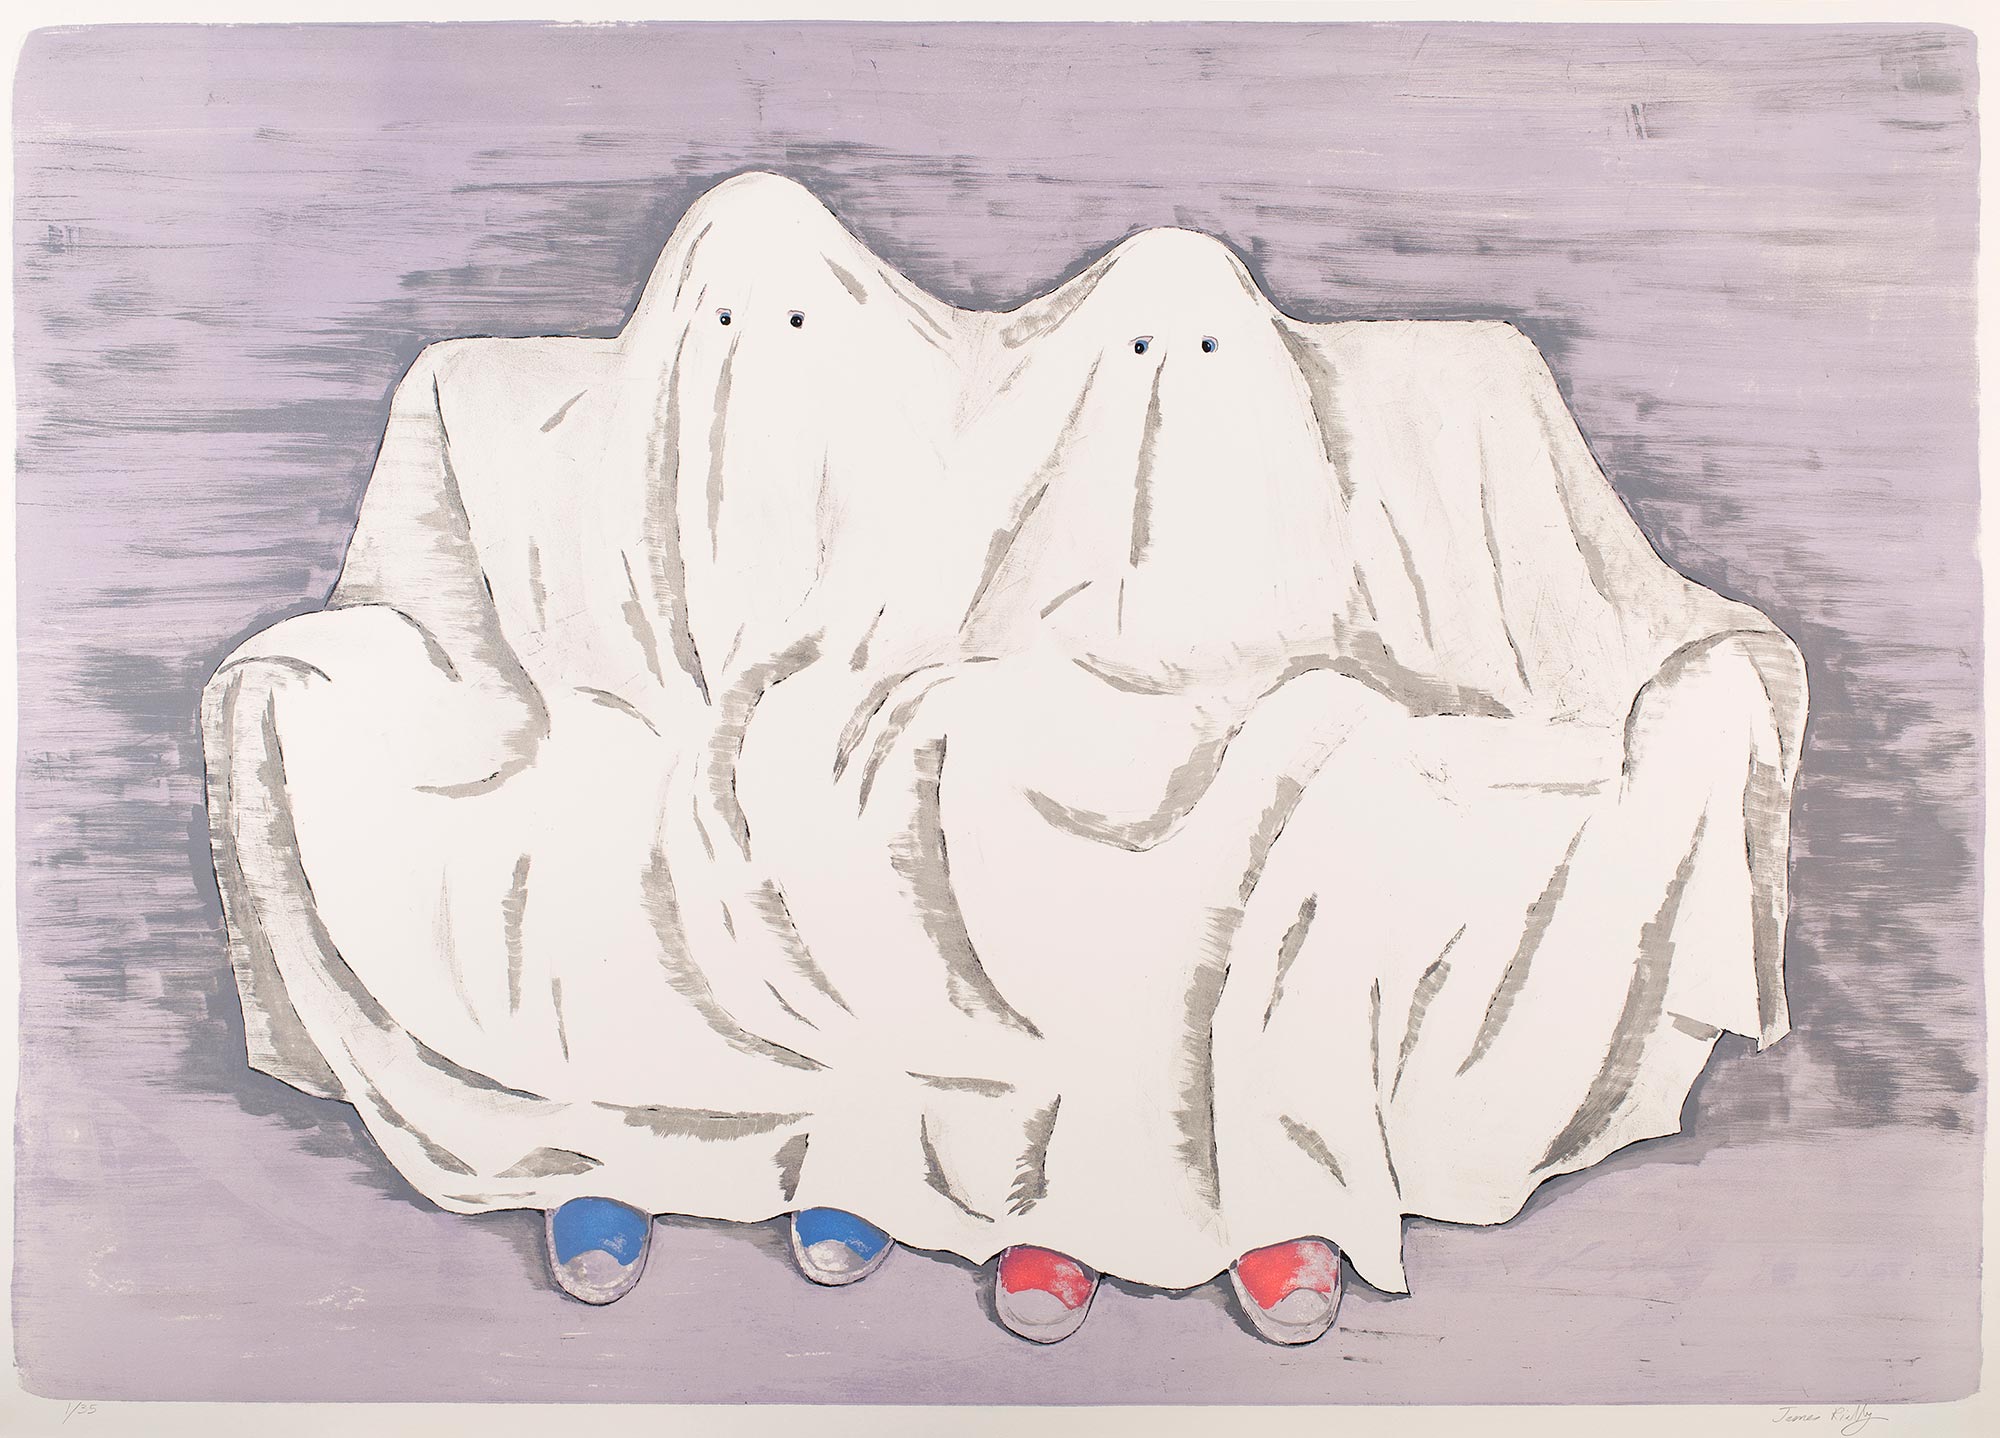 James RIELLY - French Ghosts, 2017